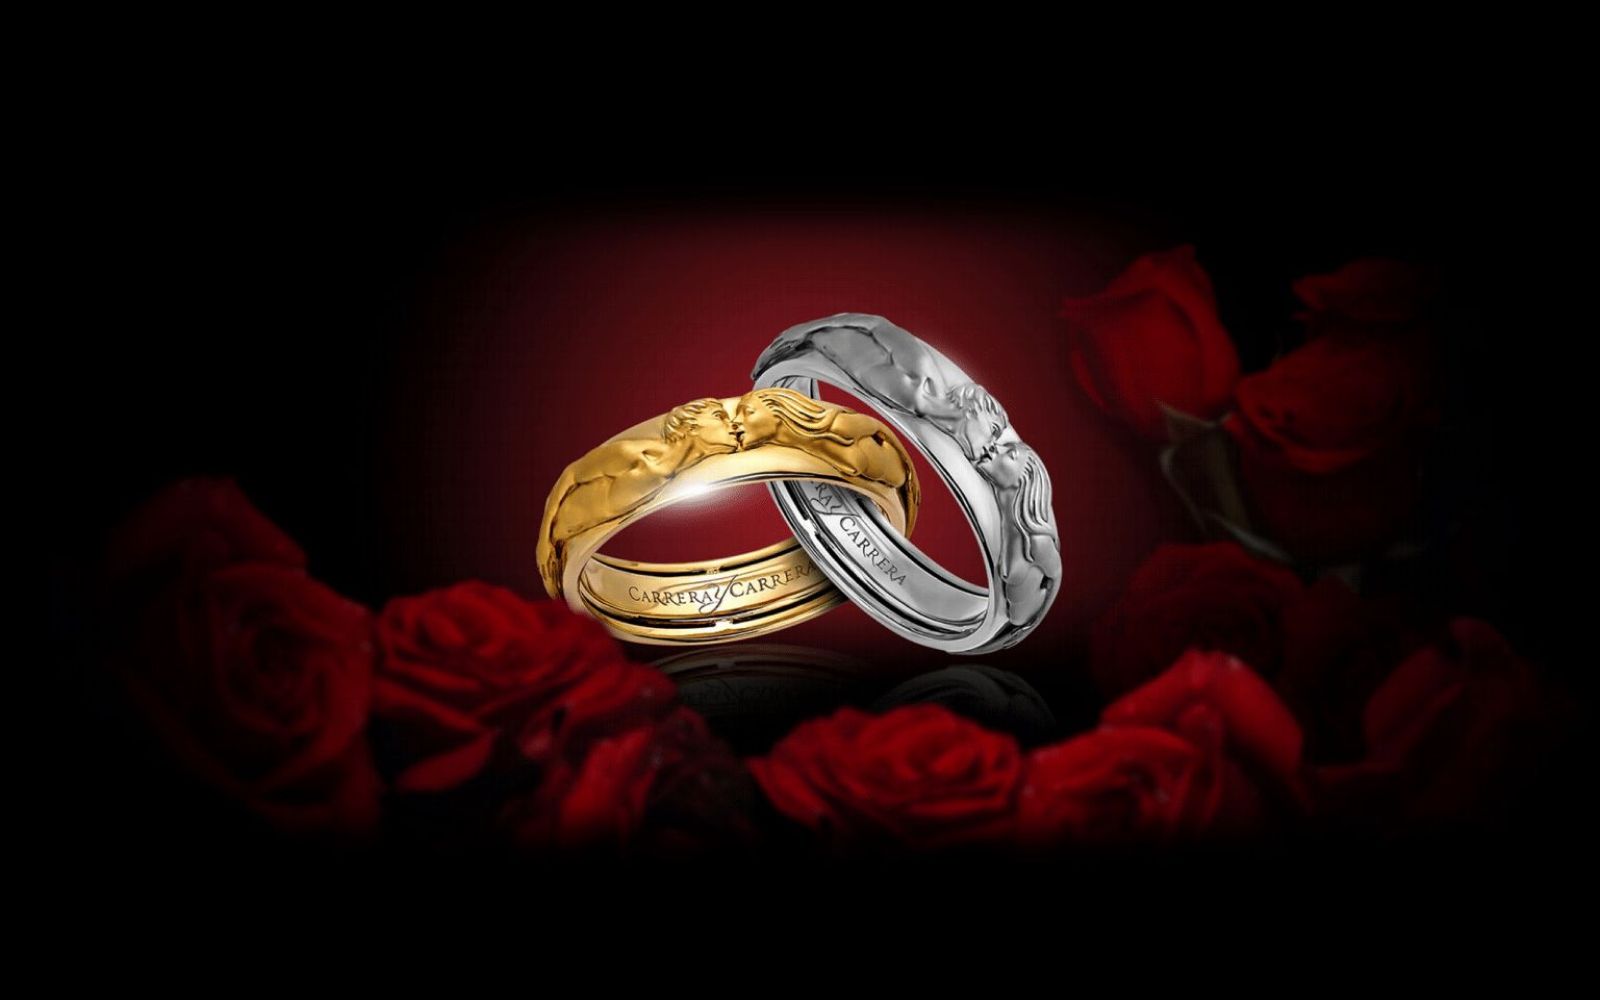 Carrera y Carrera The Kiss rings in 18k yellow and white gold from the Infinito collection 